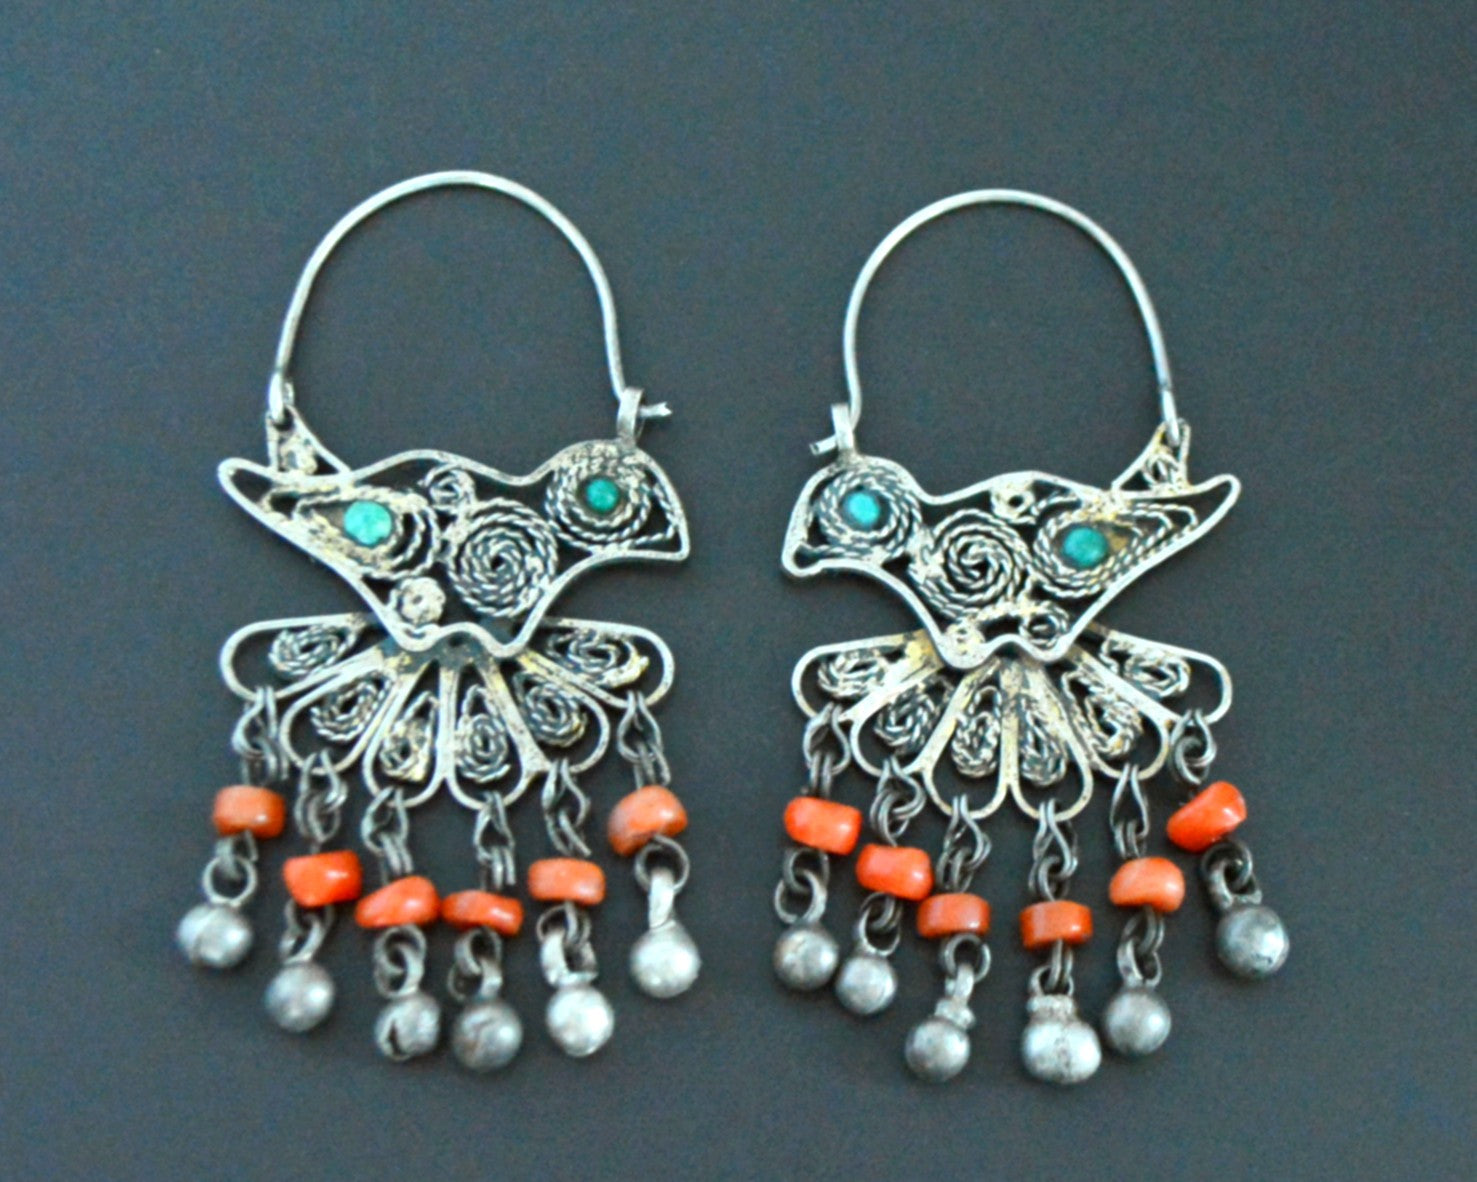 Uzbek Bird Earrings with Turquoise and Coral